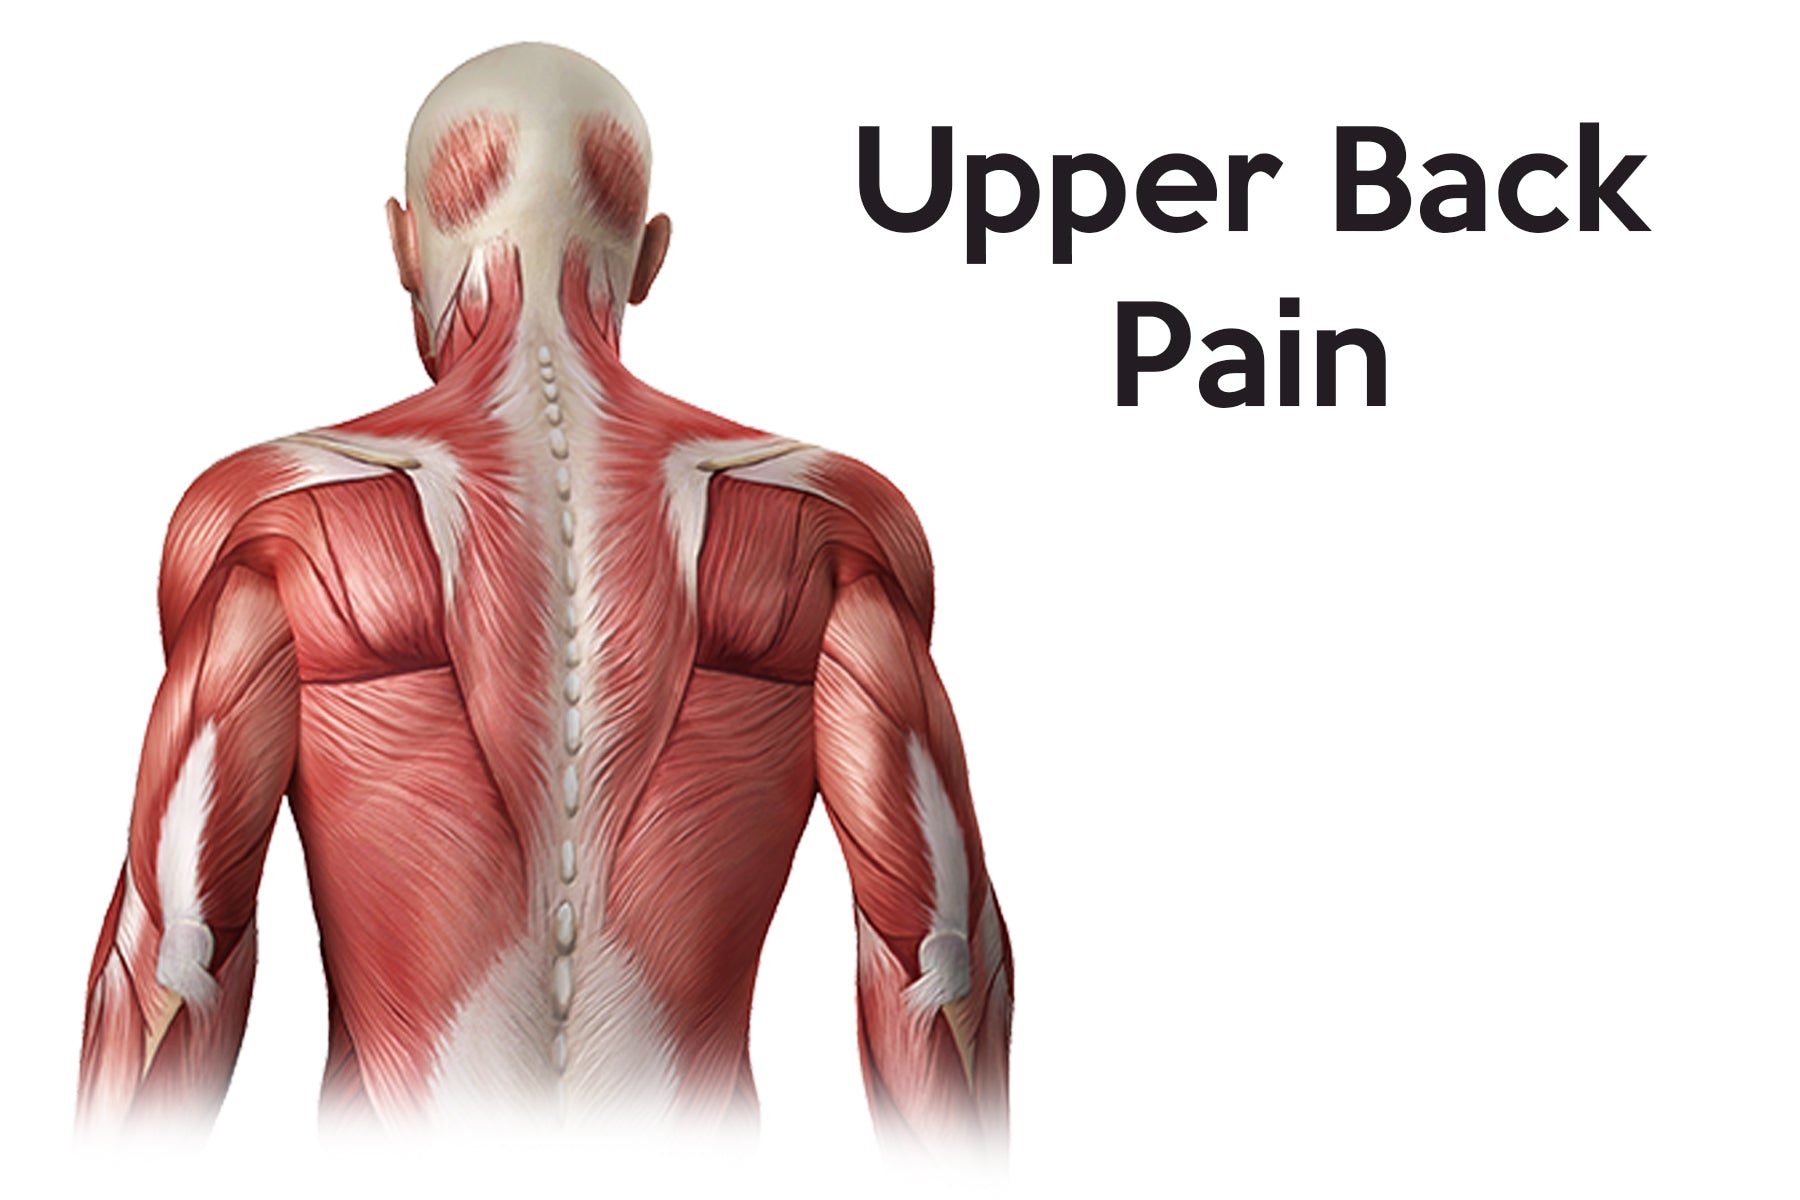 There are many treatment options for upper back pain, use this chart to determine the recovery process you need